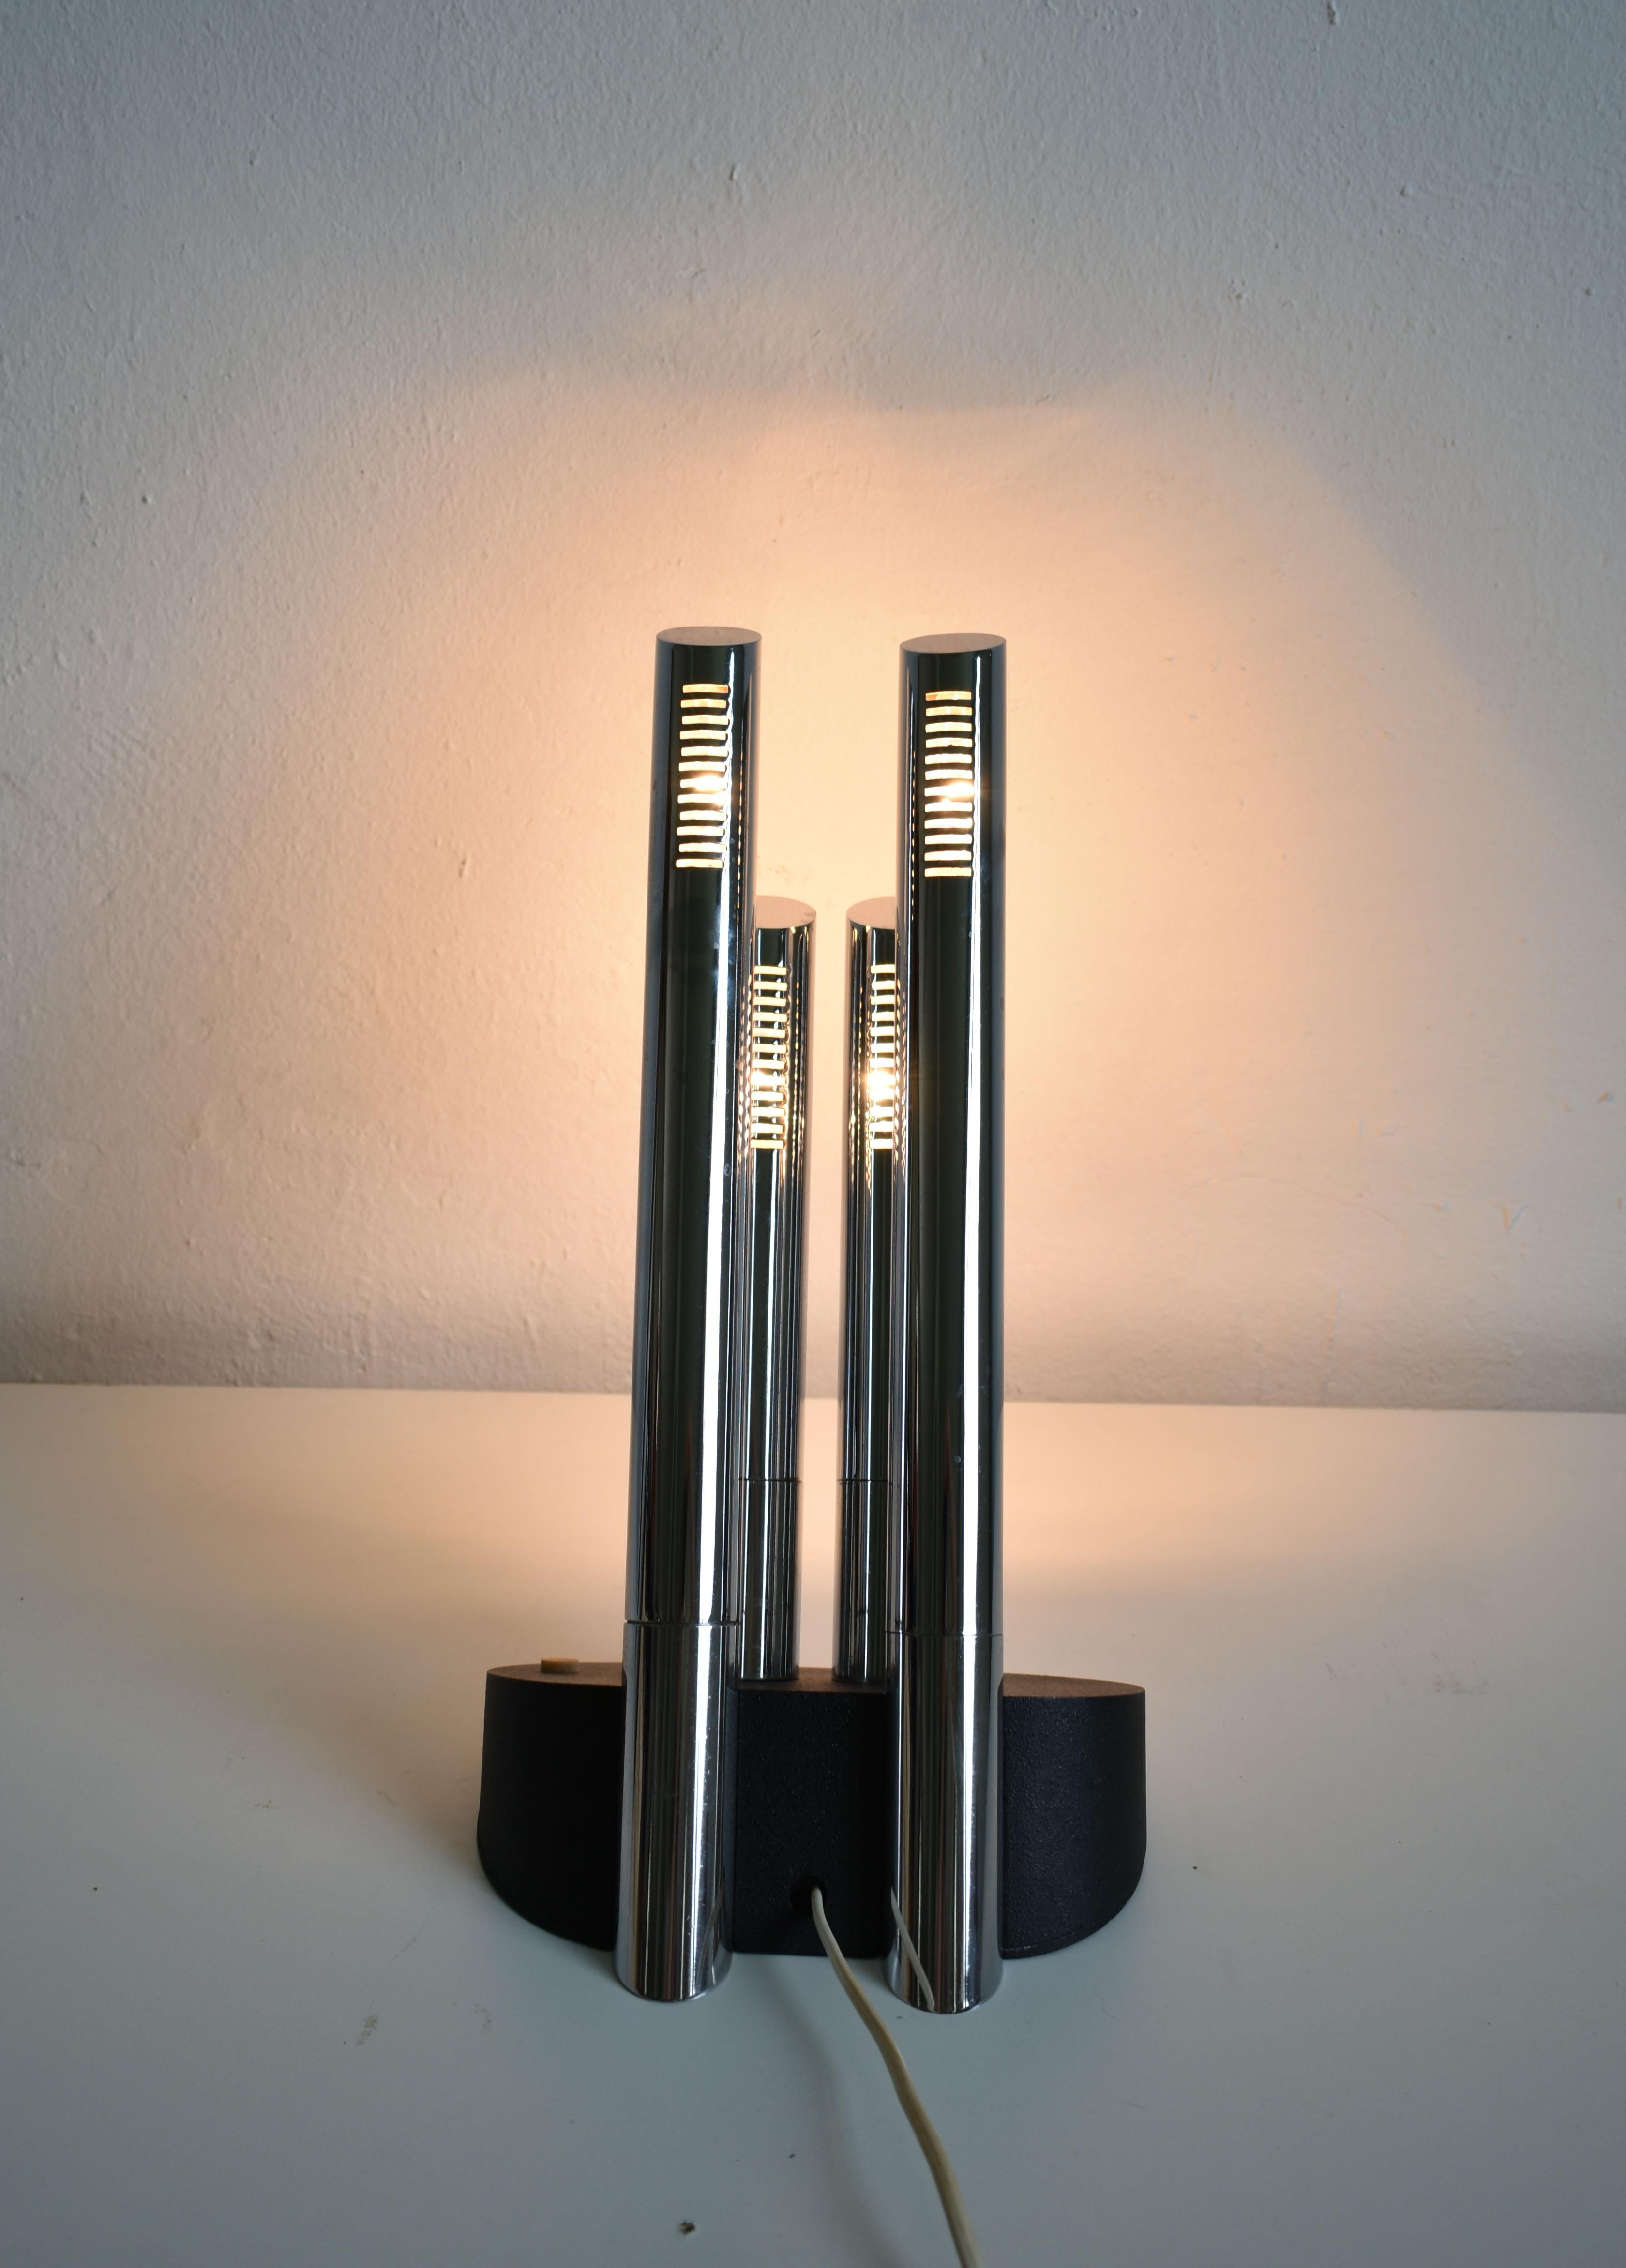 20th Century Table Lamp Designed by Mario Faggian, Model T443, Produced by Luci, Italy, 1970s